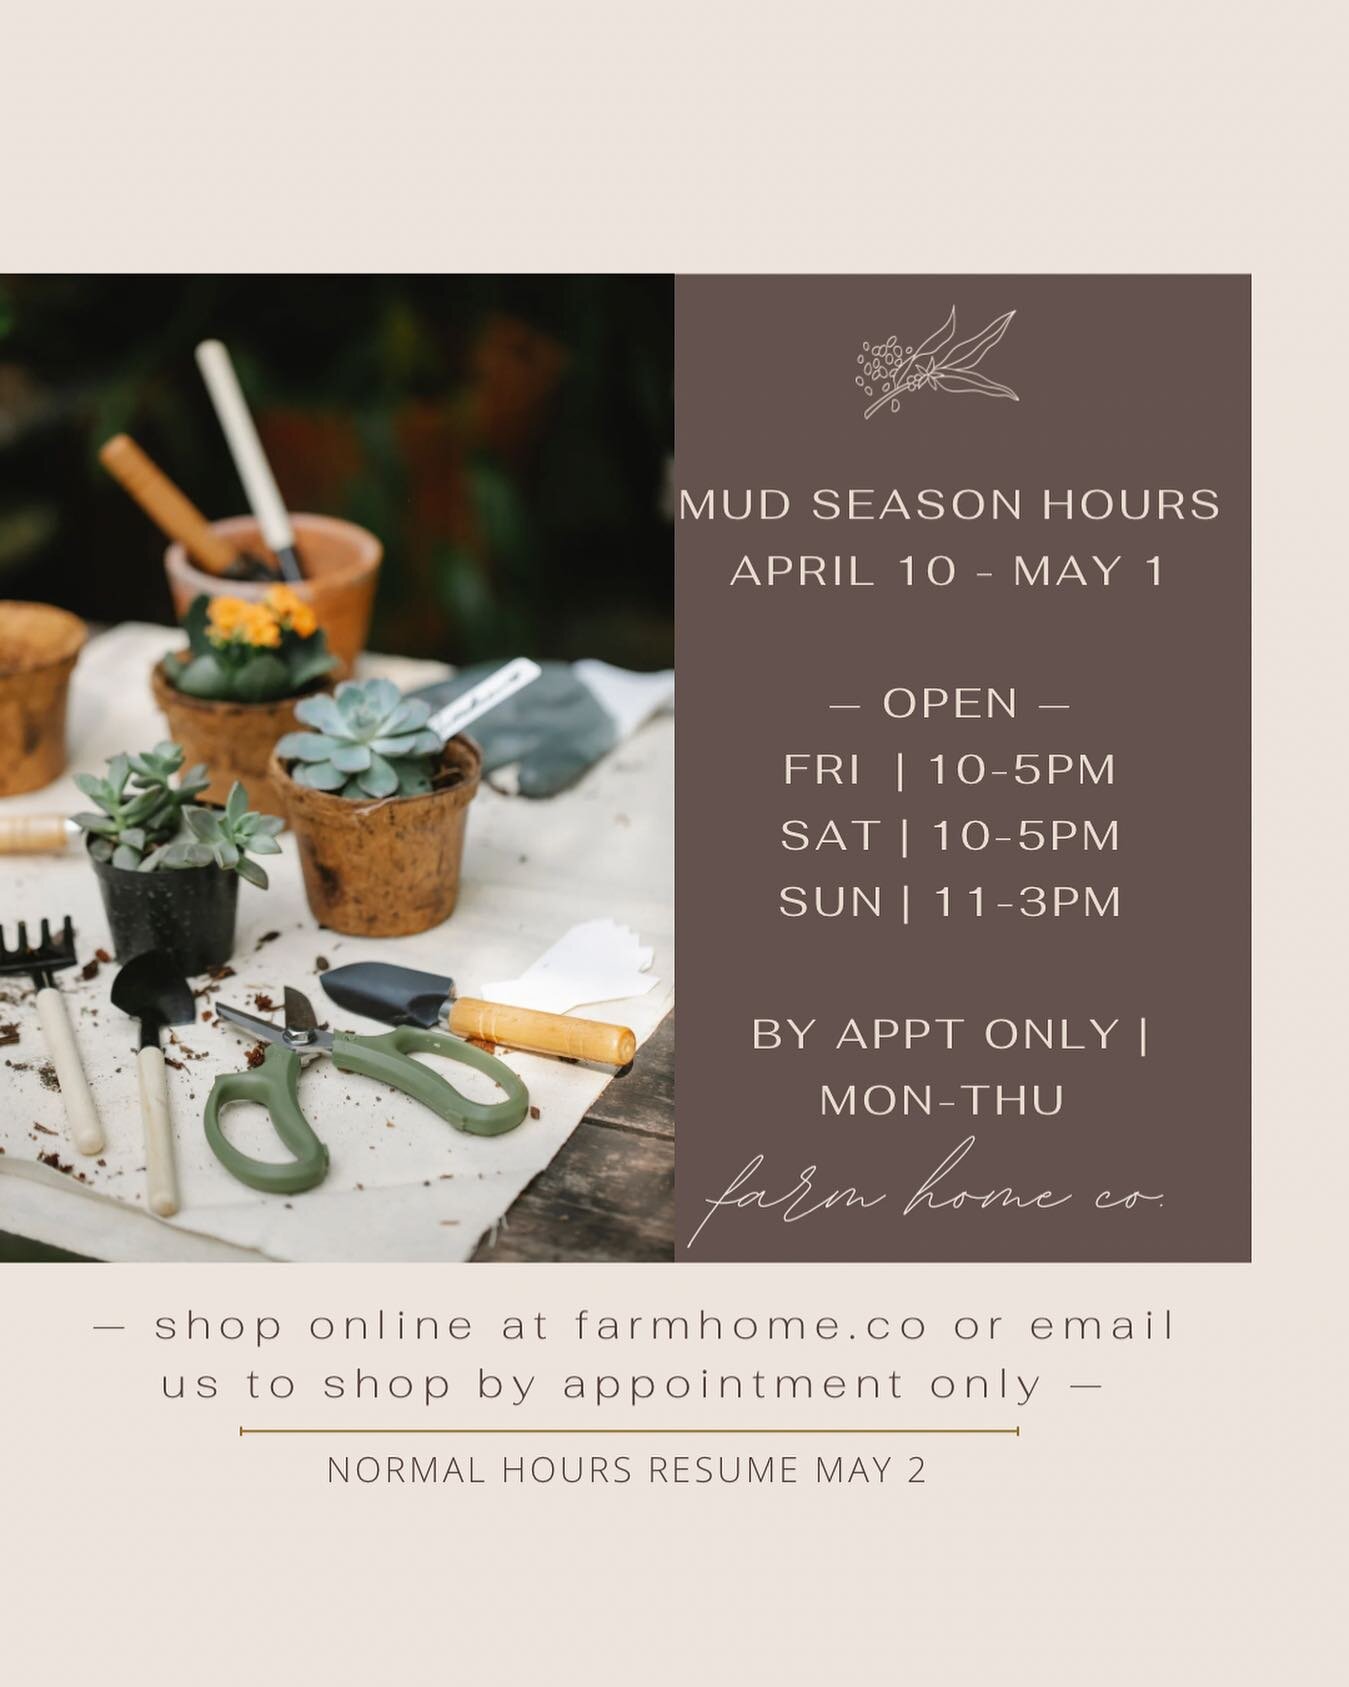 * MUD SEASON HOURS START NOW * 

We are closed for Easter and mud season hours begin April 10-May 1. The shop will be open Fridays &amp; Saturdays 10-5pm and Sundays 11-3pm, and by appointment only during these 3 weeks. To schedule an appointment Mon